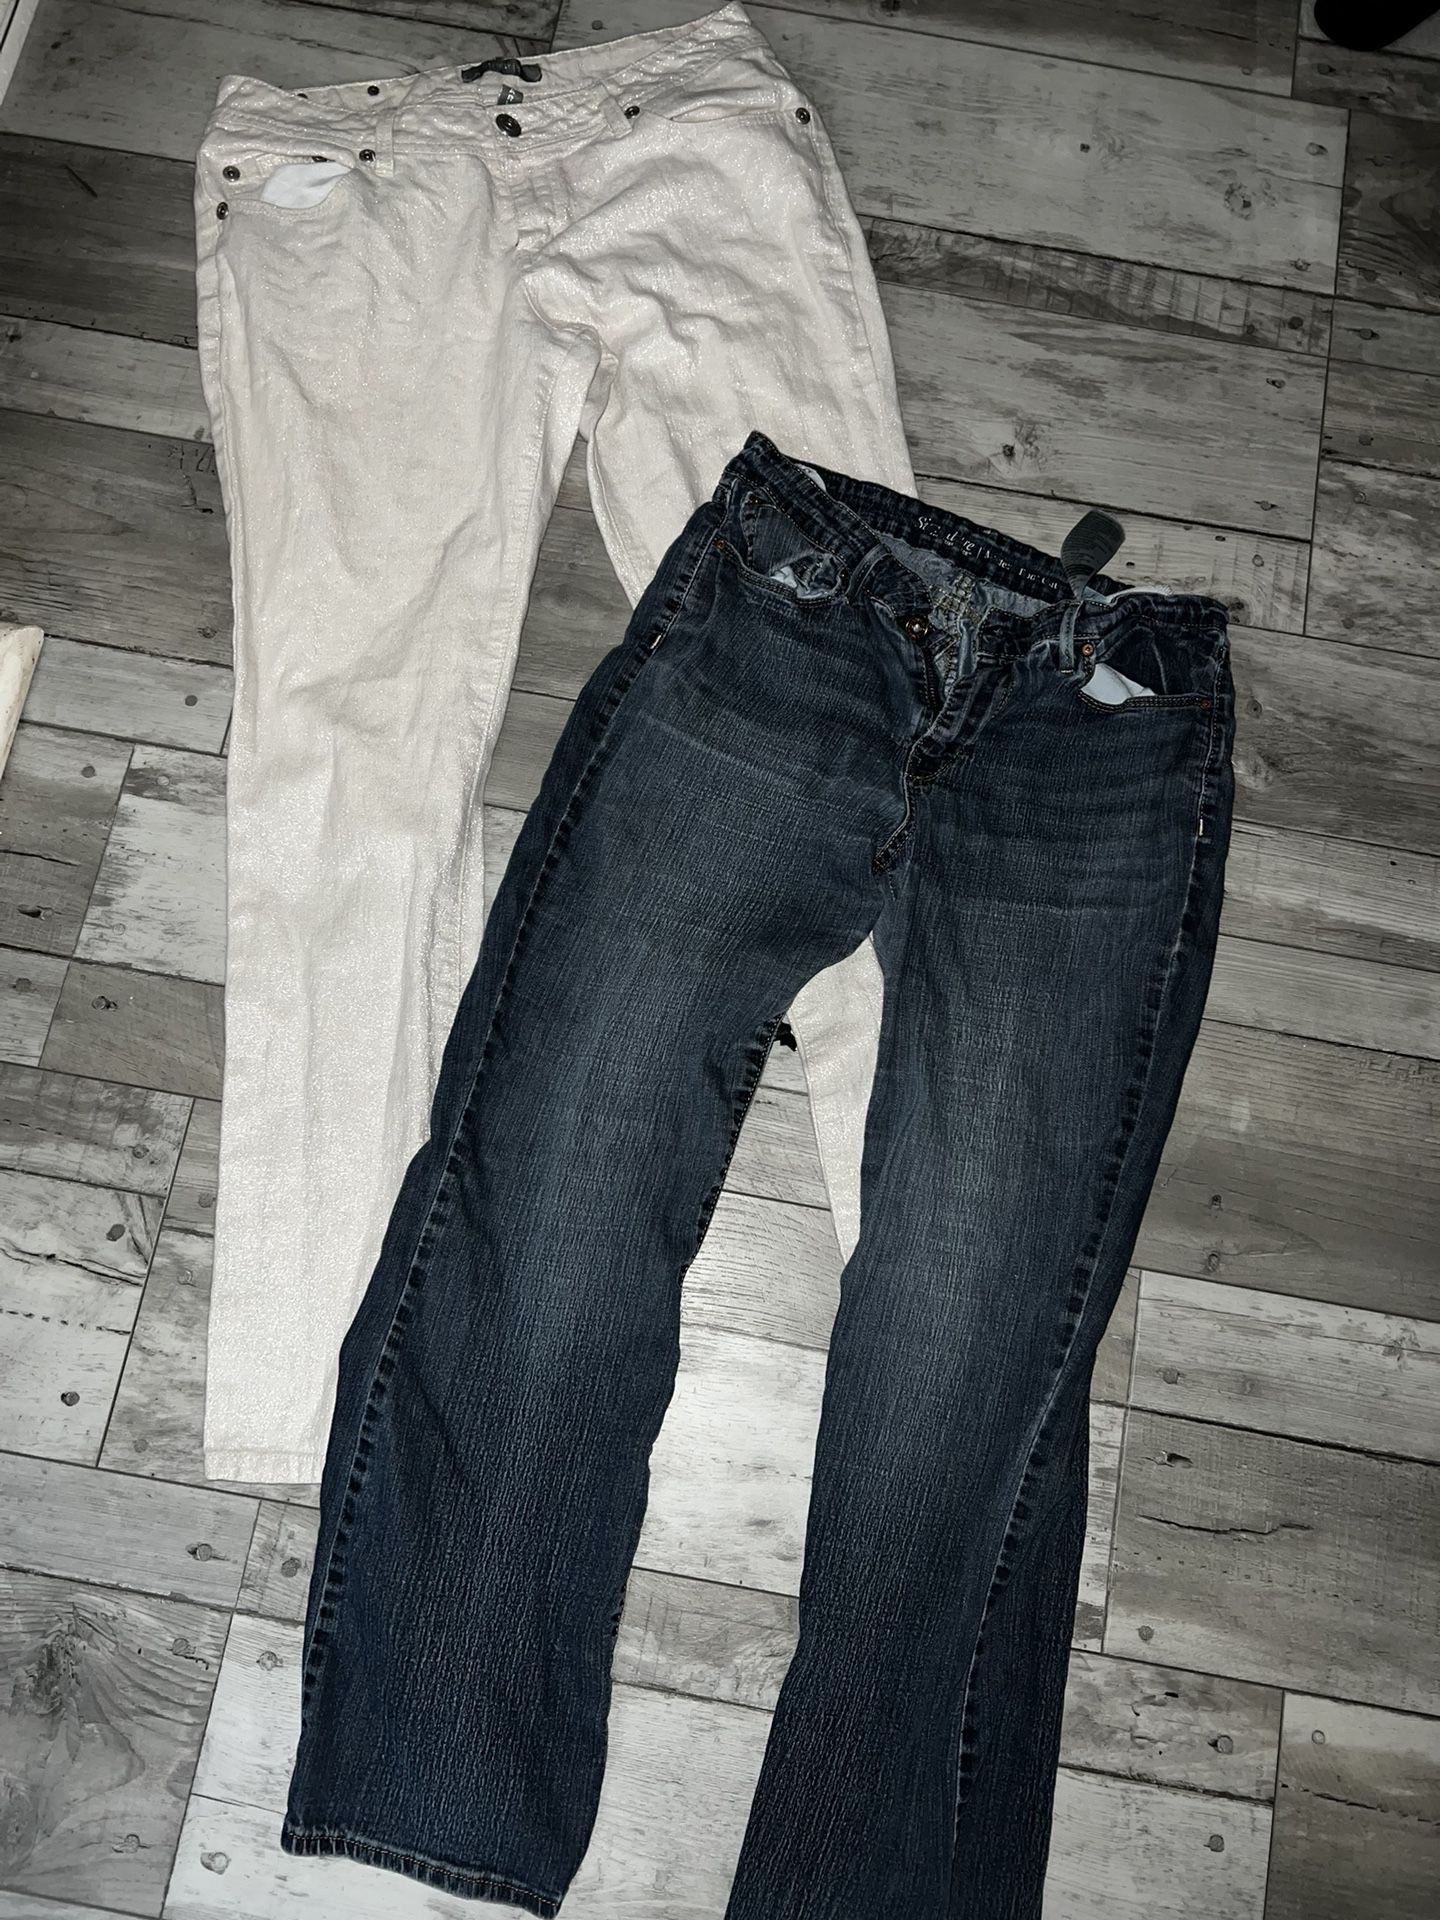 Size 12/13 Pants Jeans Lot Womens Levi’s And Cream Pants Cute 